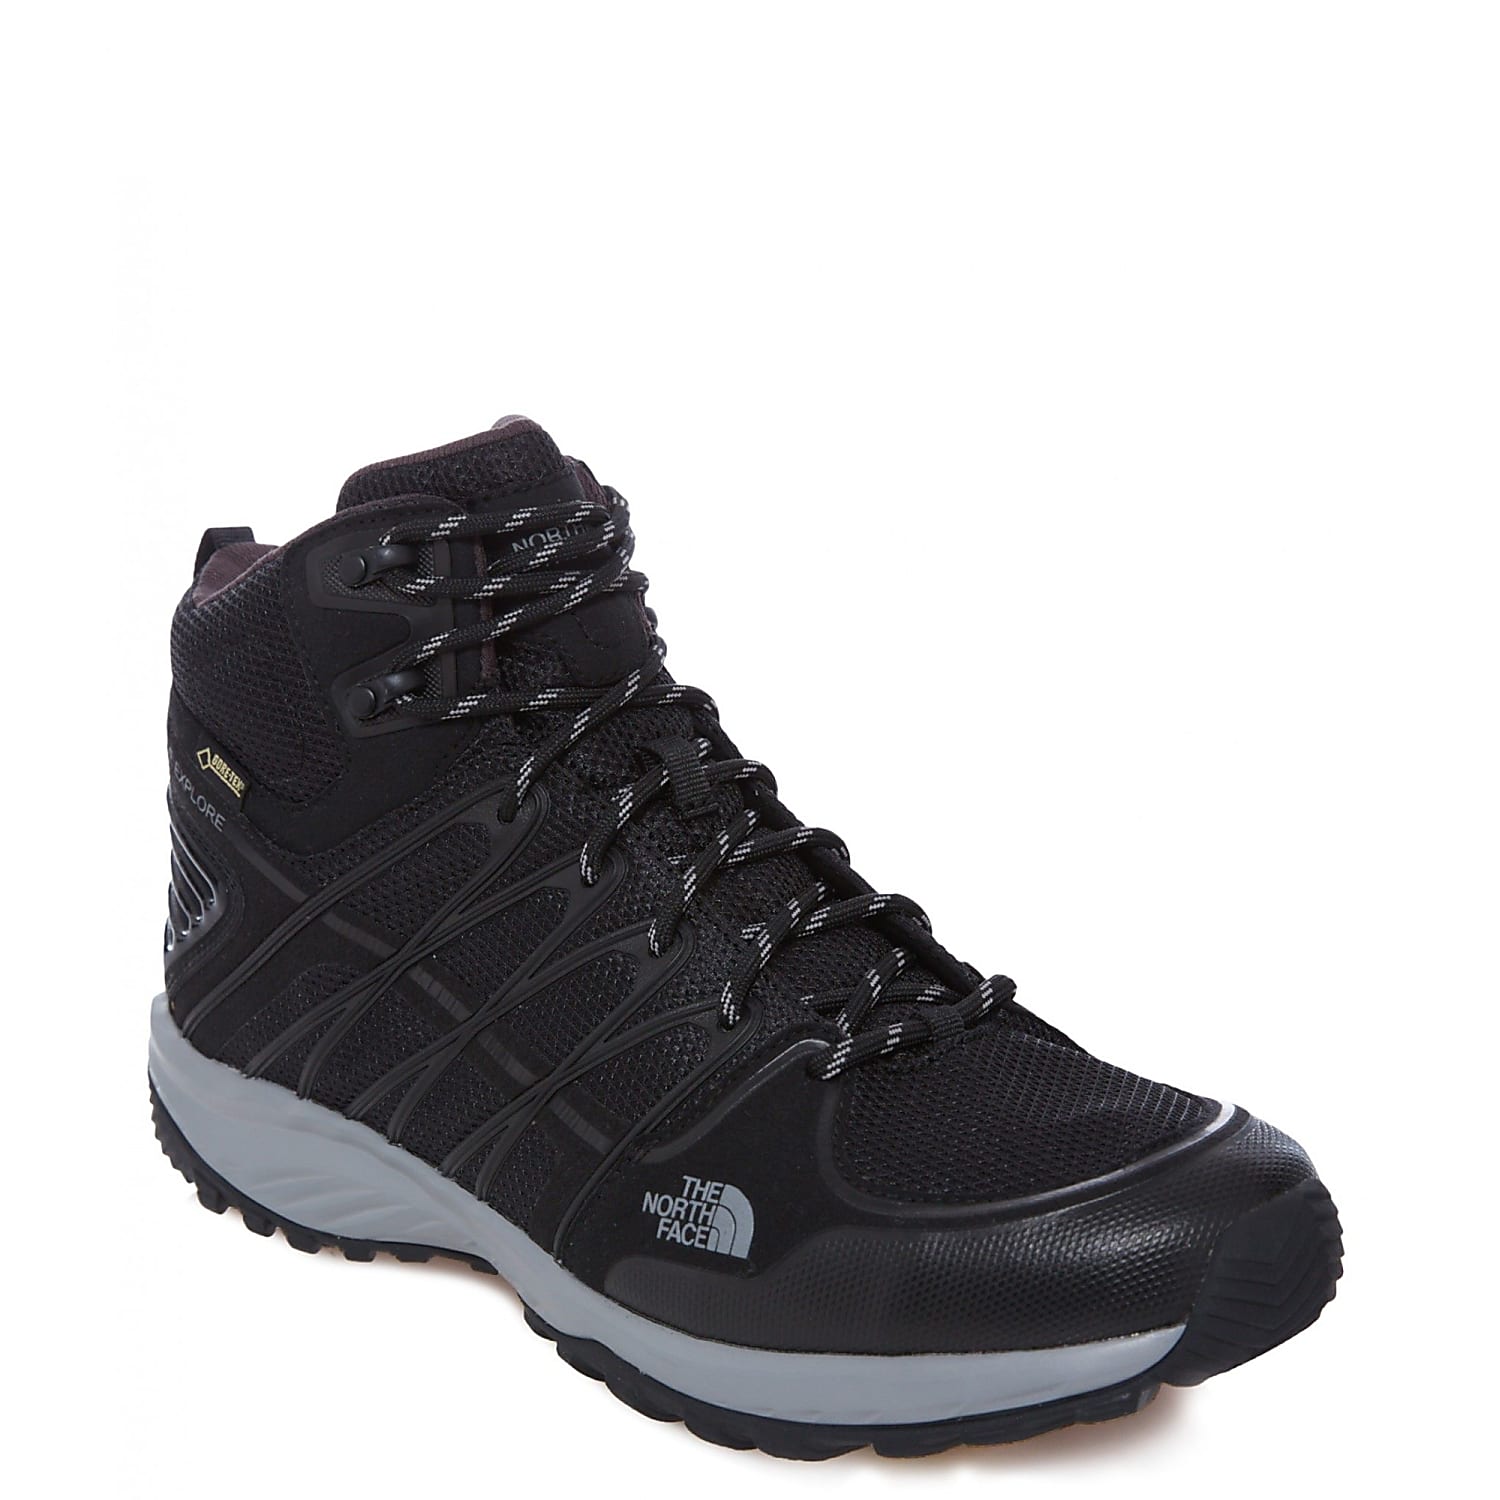 The Face LITEWAVE EXPLORE MID TNF Black - Metallic Silver - Fast and cheap shipping - www.exxpozed.com